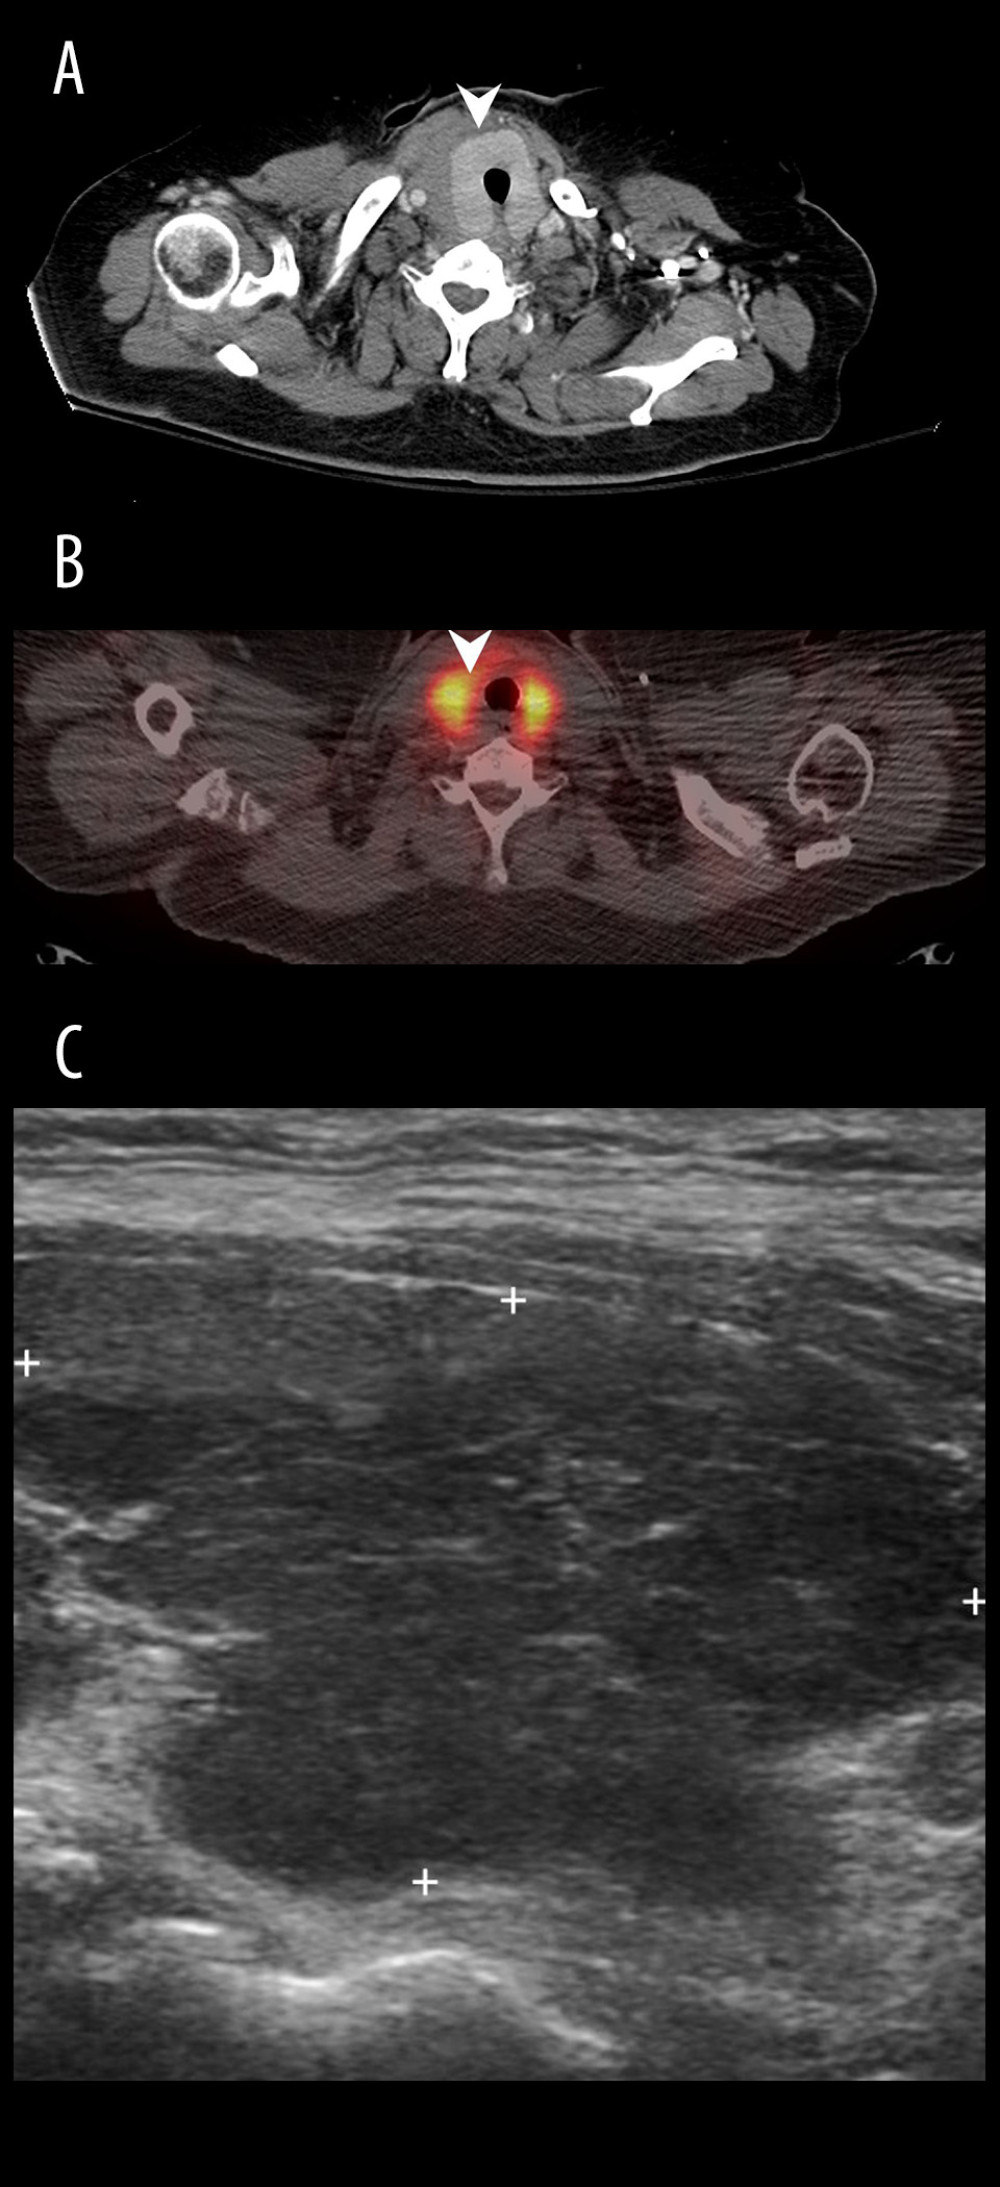 A 60-year-old woman with hepatitis C-related liver cirrhosis. (A) Chest CT showed an enlarged thyroid gland without mass; (B) 18F-FDG PET/CT revealed diffuse uptake over bilateral thyroid with SUVmax up to 12.8; (C) Longitudinal view of thyroid echo disclosed hypoechoic parenchyma, compatible with thyroiditis change.